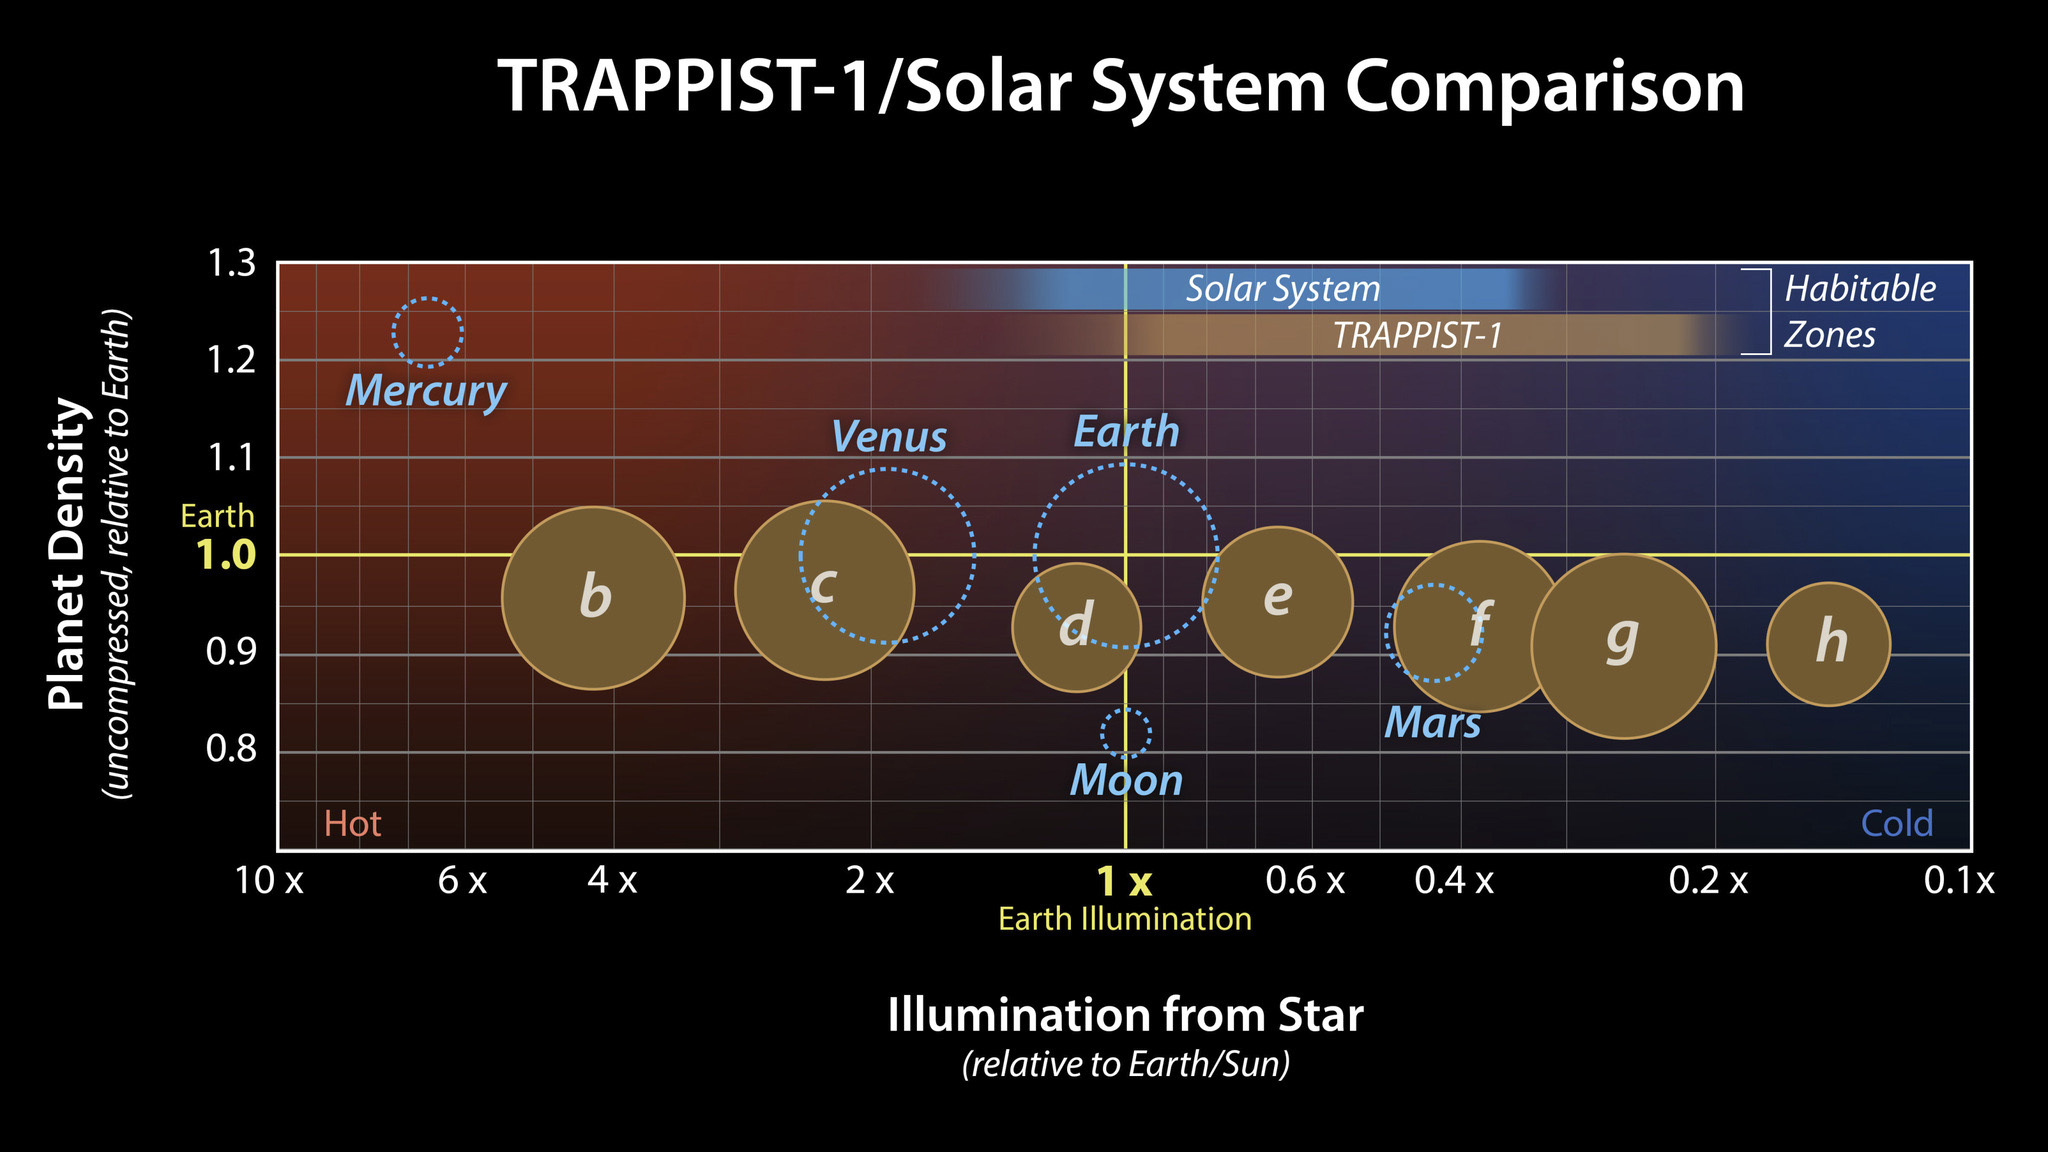 Comparisons of TRAPPIST-1 planets to solar system planets